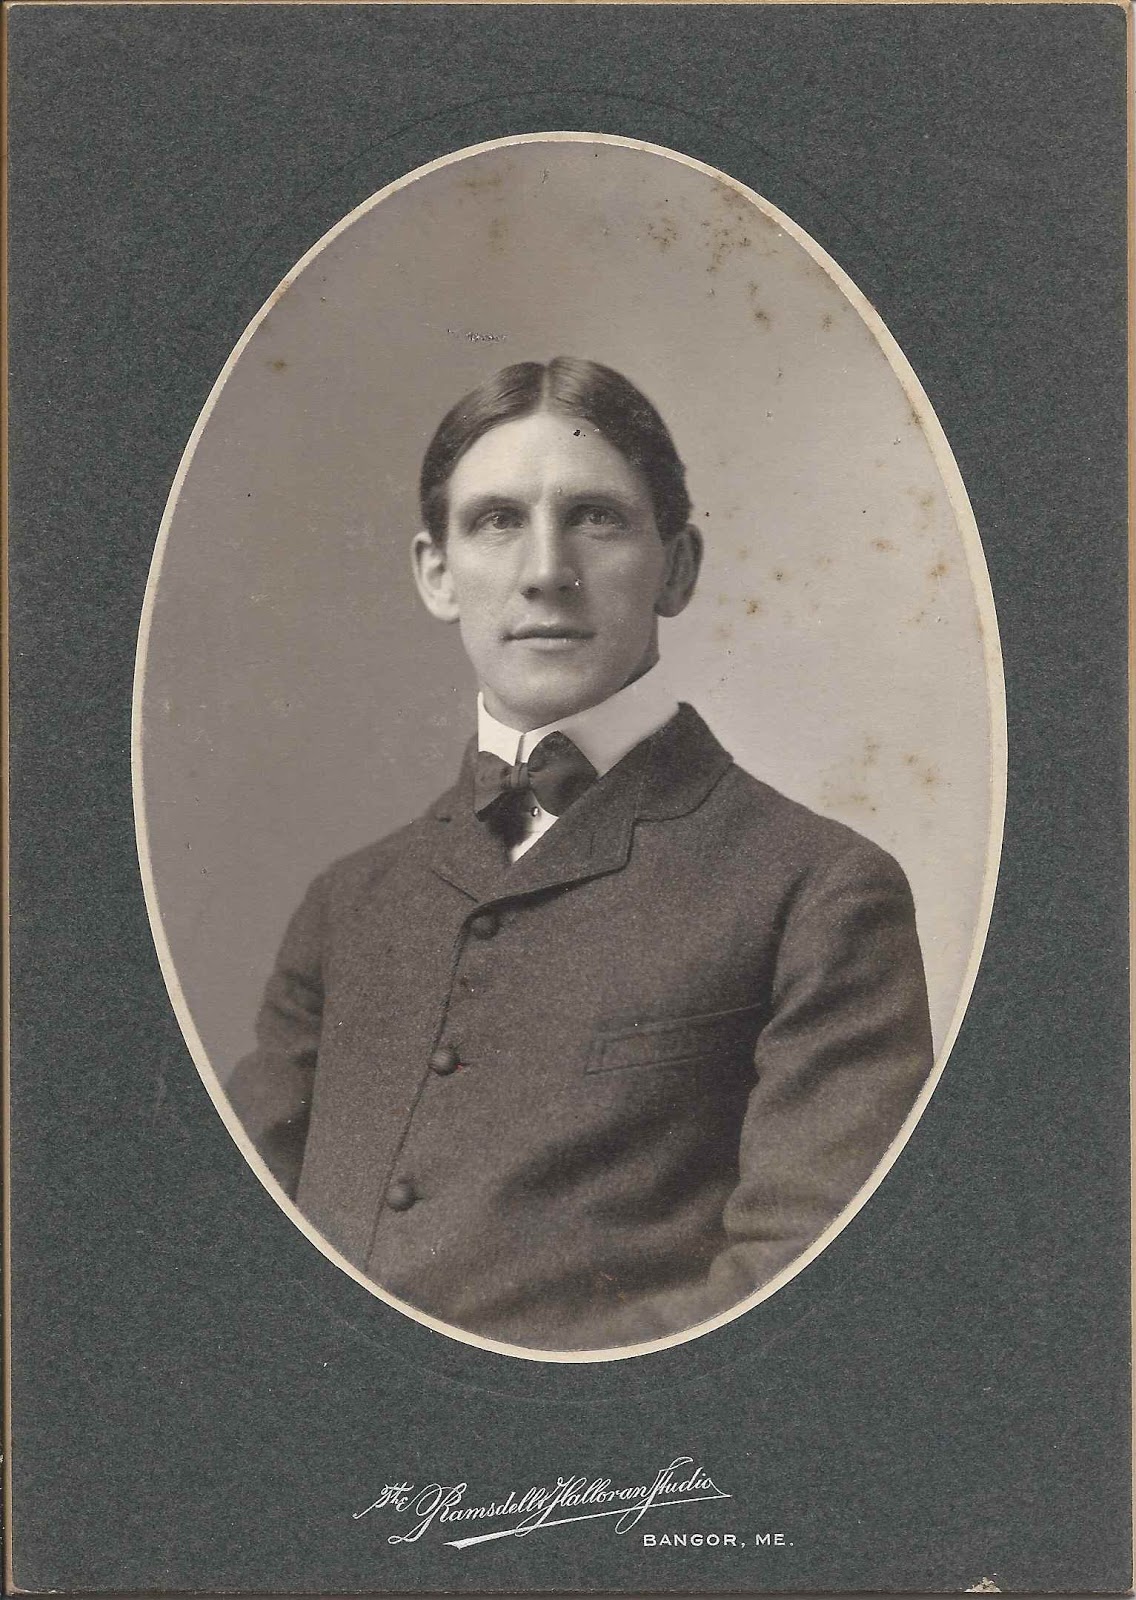 Heirlooms Reunited: c1903 Photograph of Winfield Lee Cole while a student  at the University of Maine